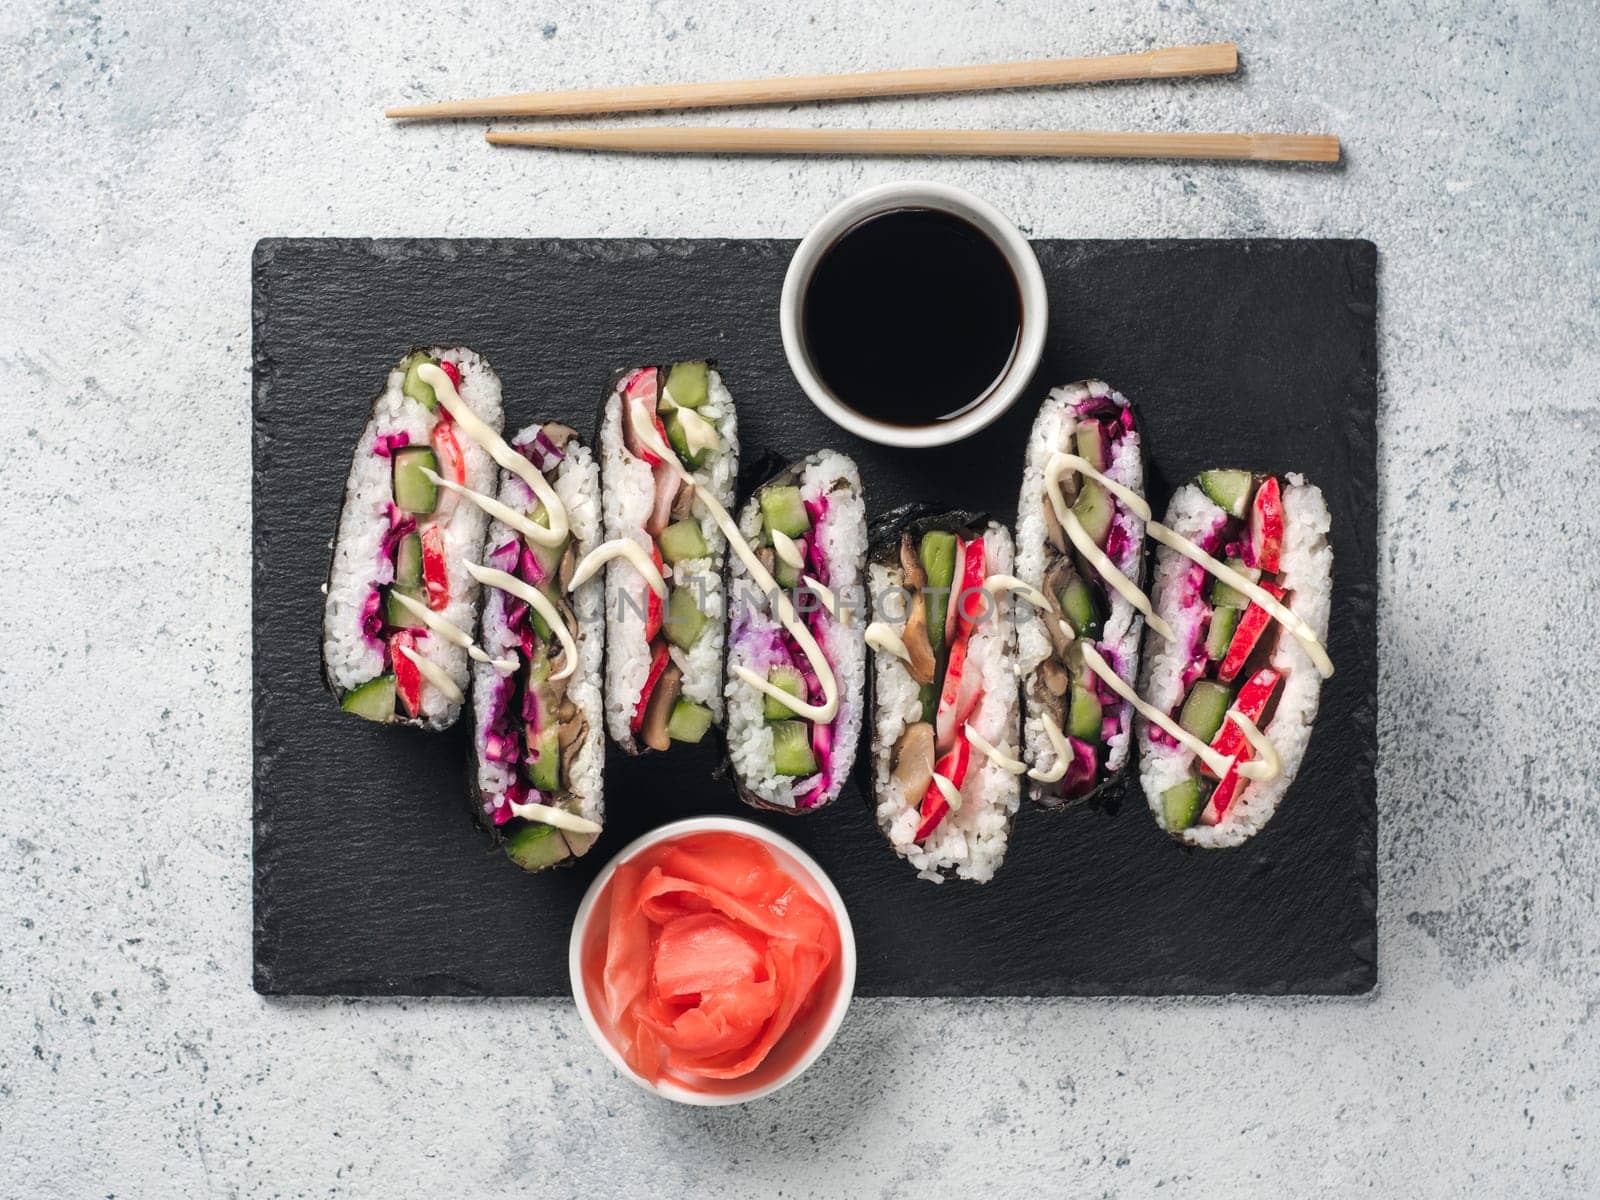 Vegan sushi sandwich onigirazu with mushrooms and vegetables. Healthy dinner recipe and idea. Colorful japan sandwich onigirazu with red cabbage,radish,cucumber,mushrooms. Trend food. Top view